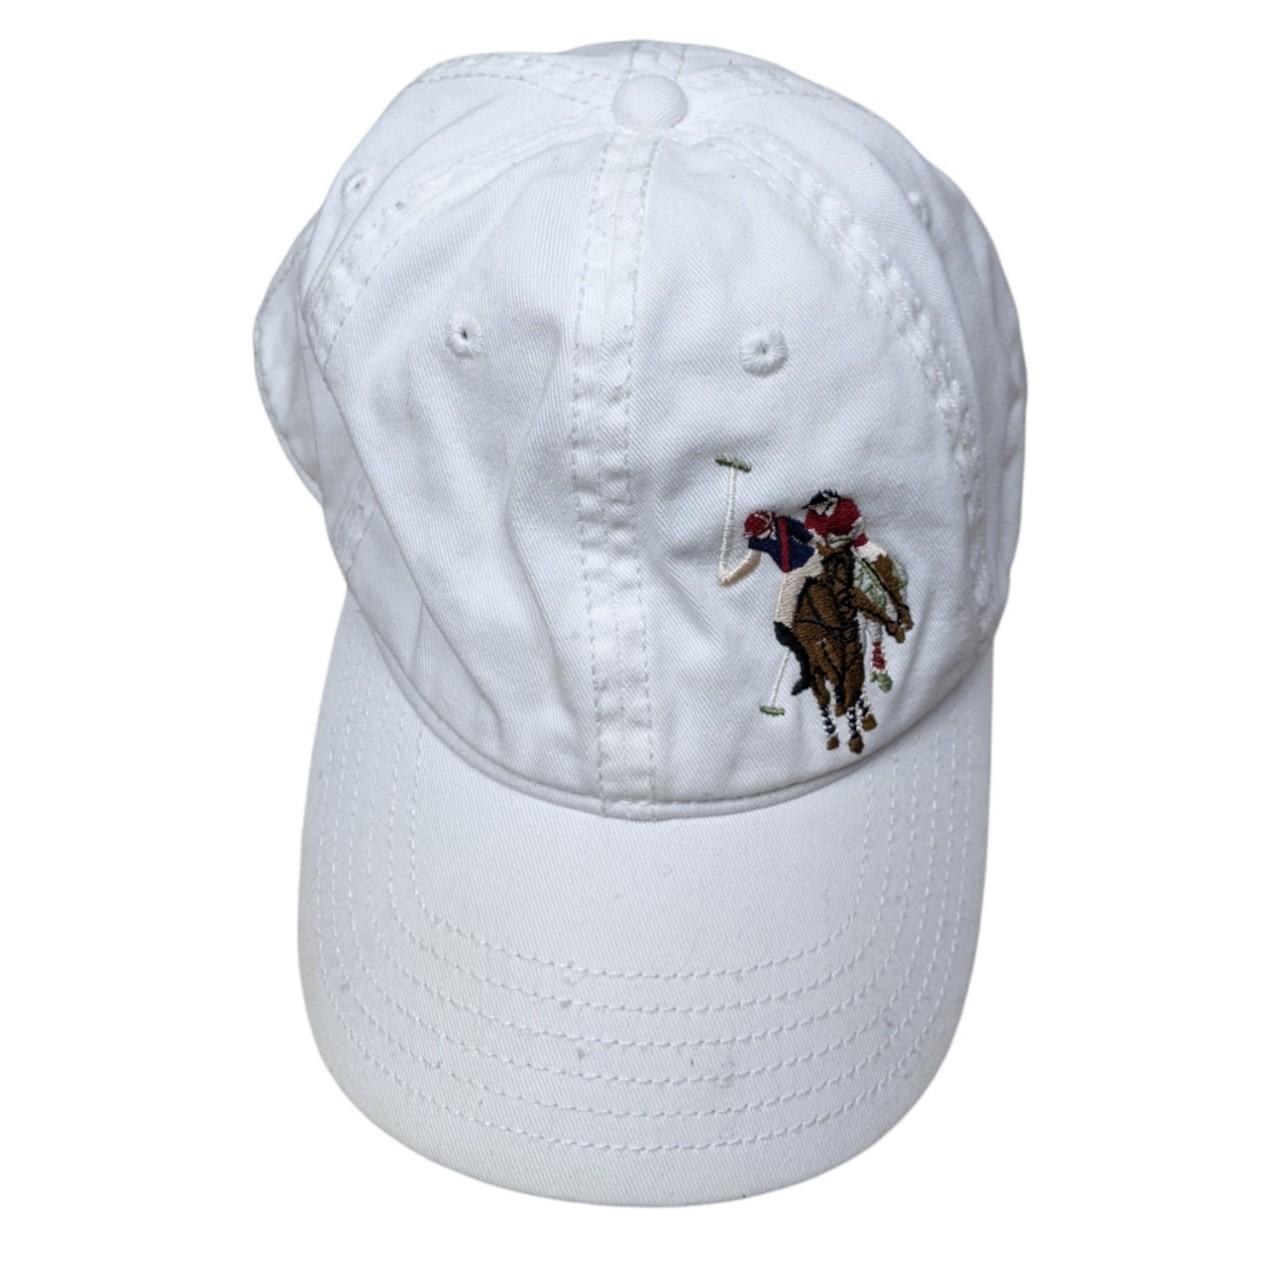 U.S. Polo Assn. Men's White and Brown Hat (3)